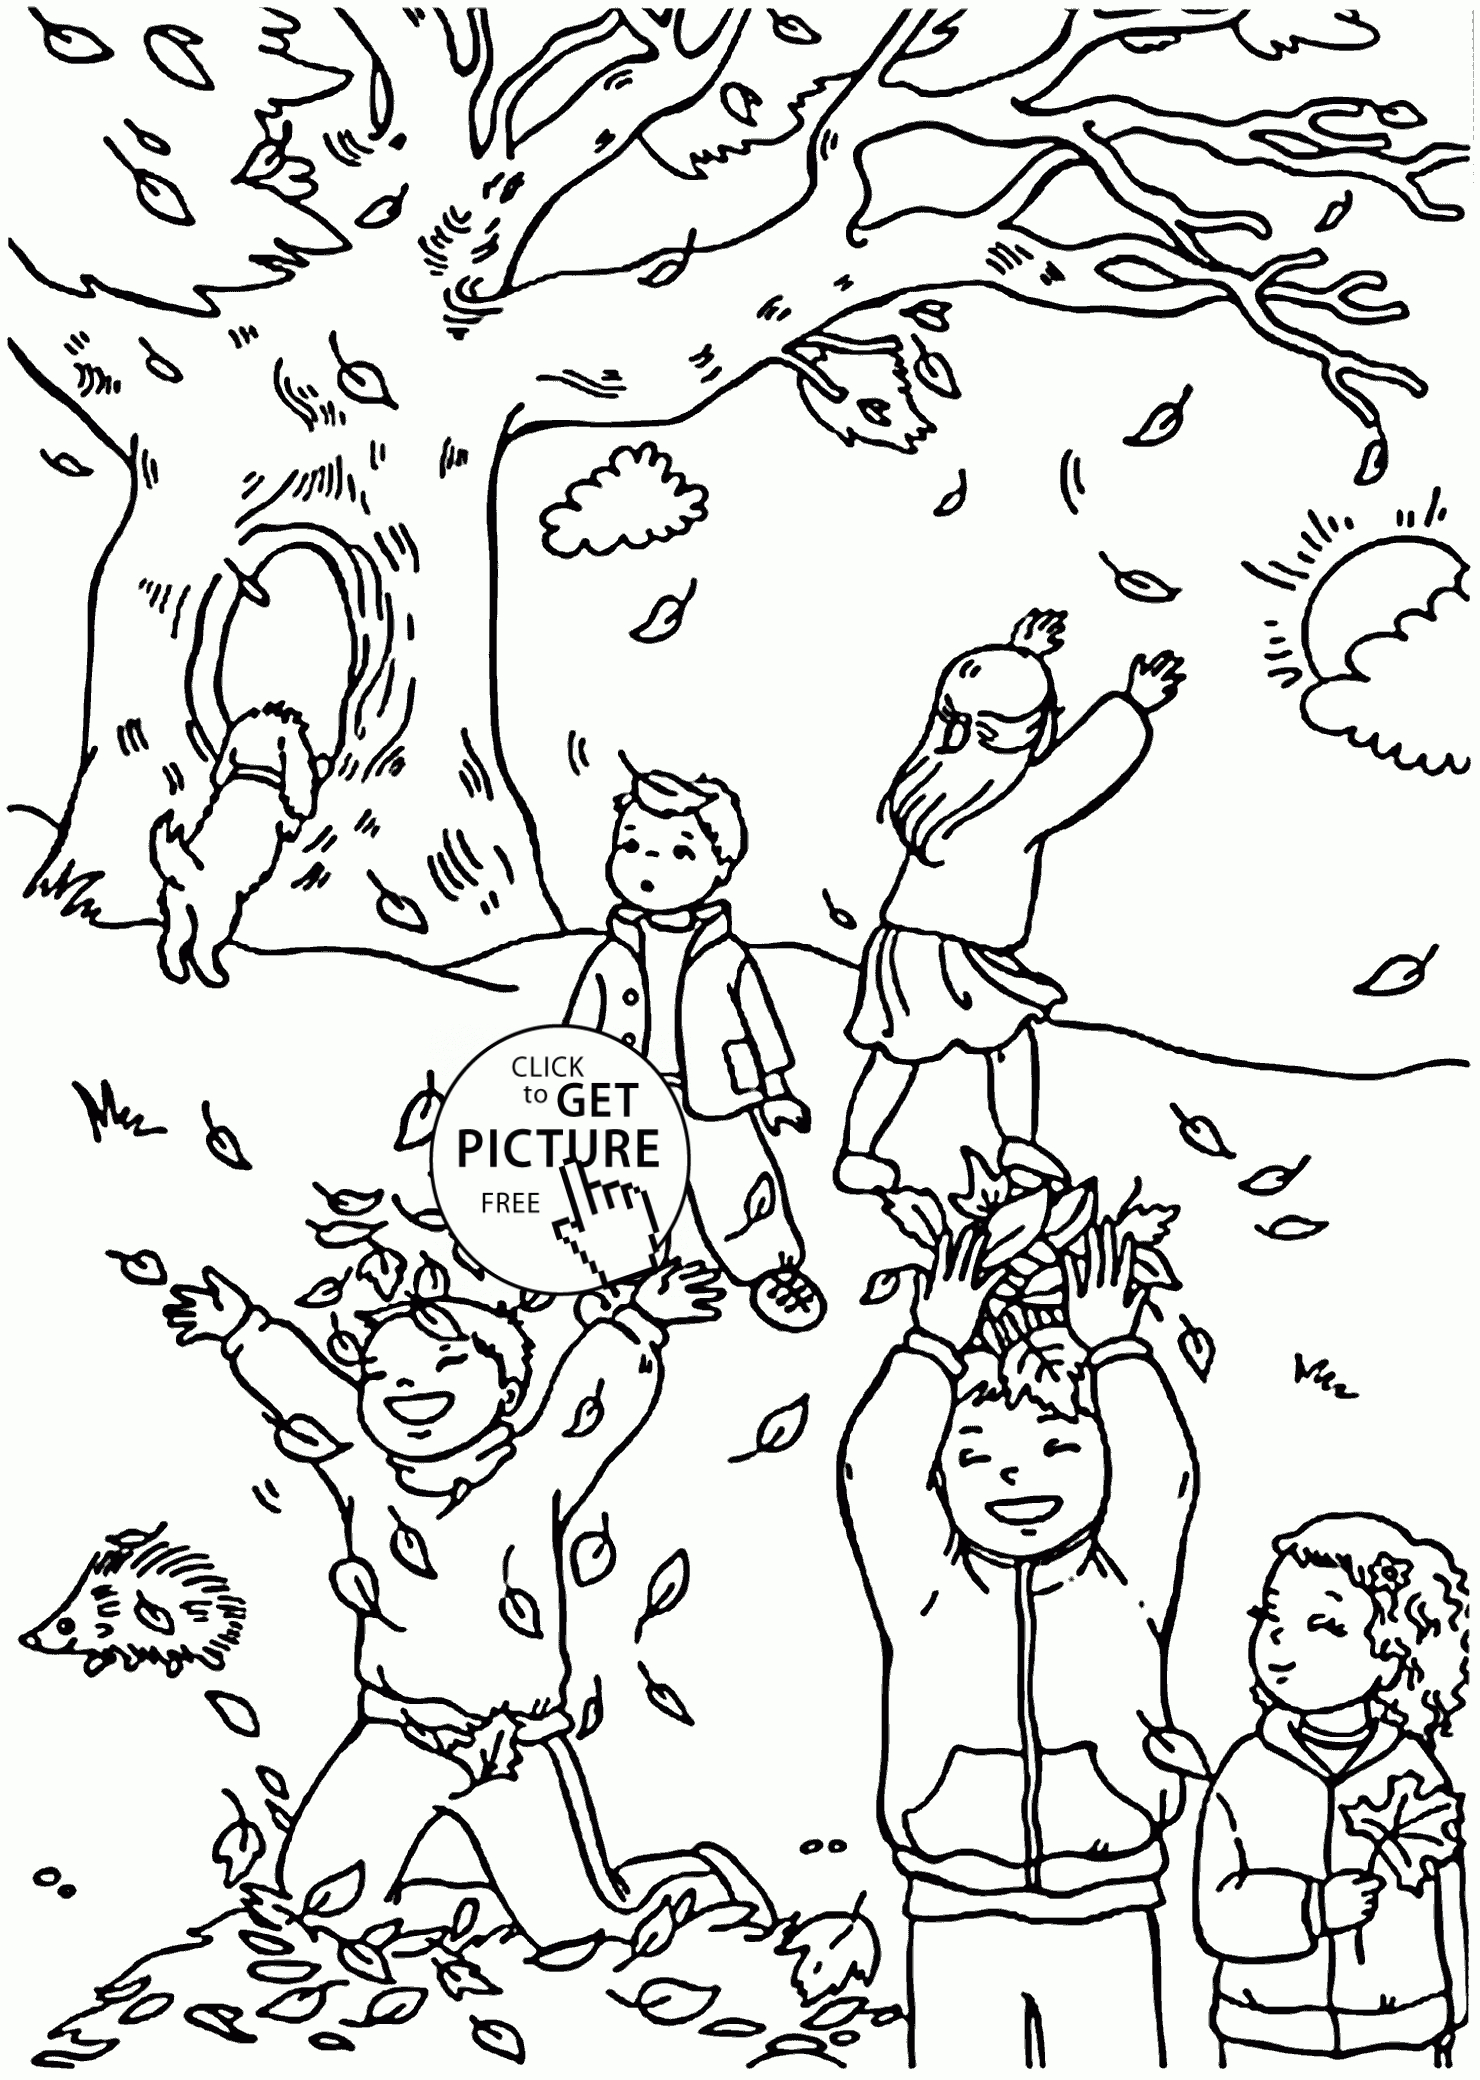 Funny Fall Coloring Pages For Kids, Autumn Leaves Printables Free - Free Printable Autumn Coloring Sheets